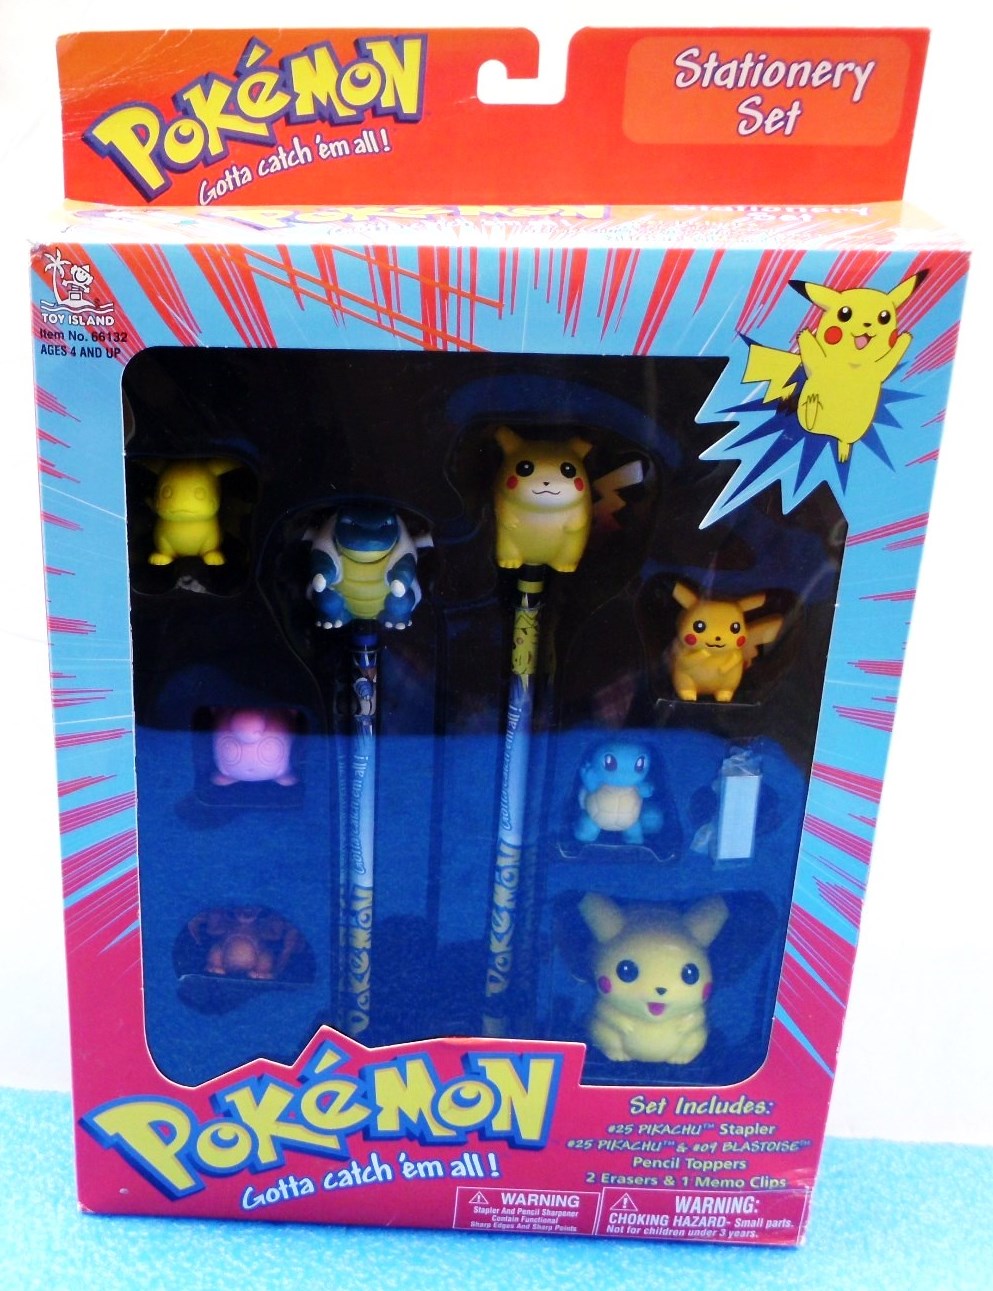 NEW IN PACKAGE DIGIMON  11 PC STATIONARY KIT PENCILS, 